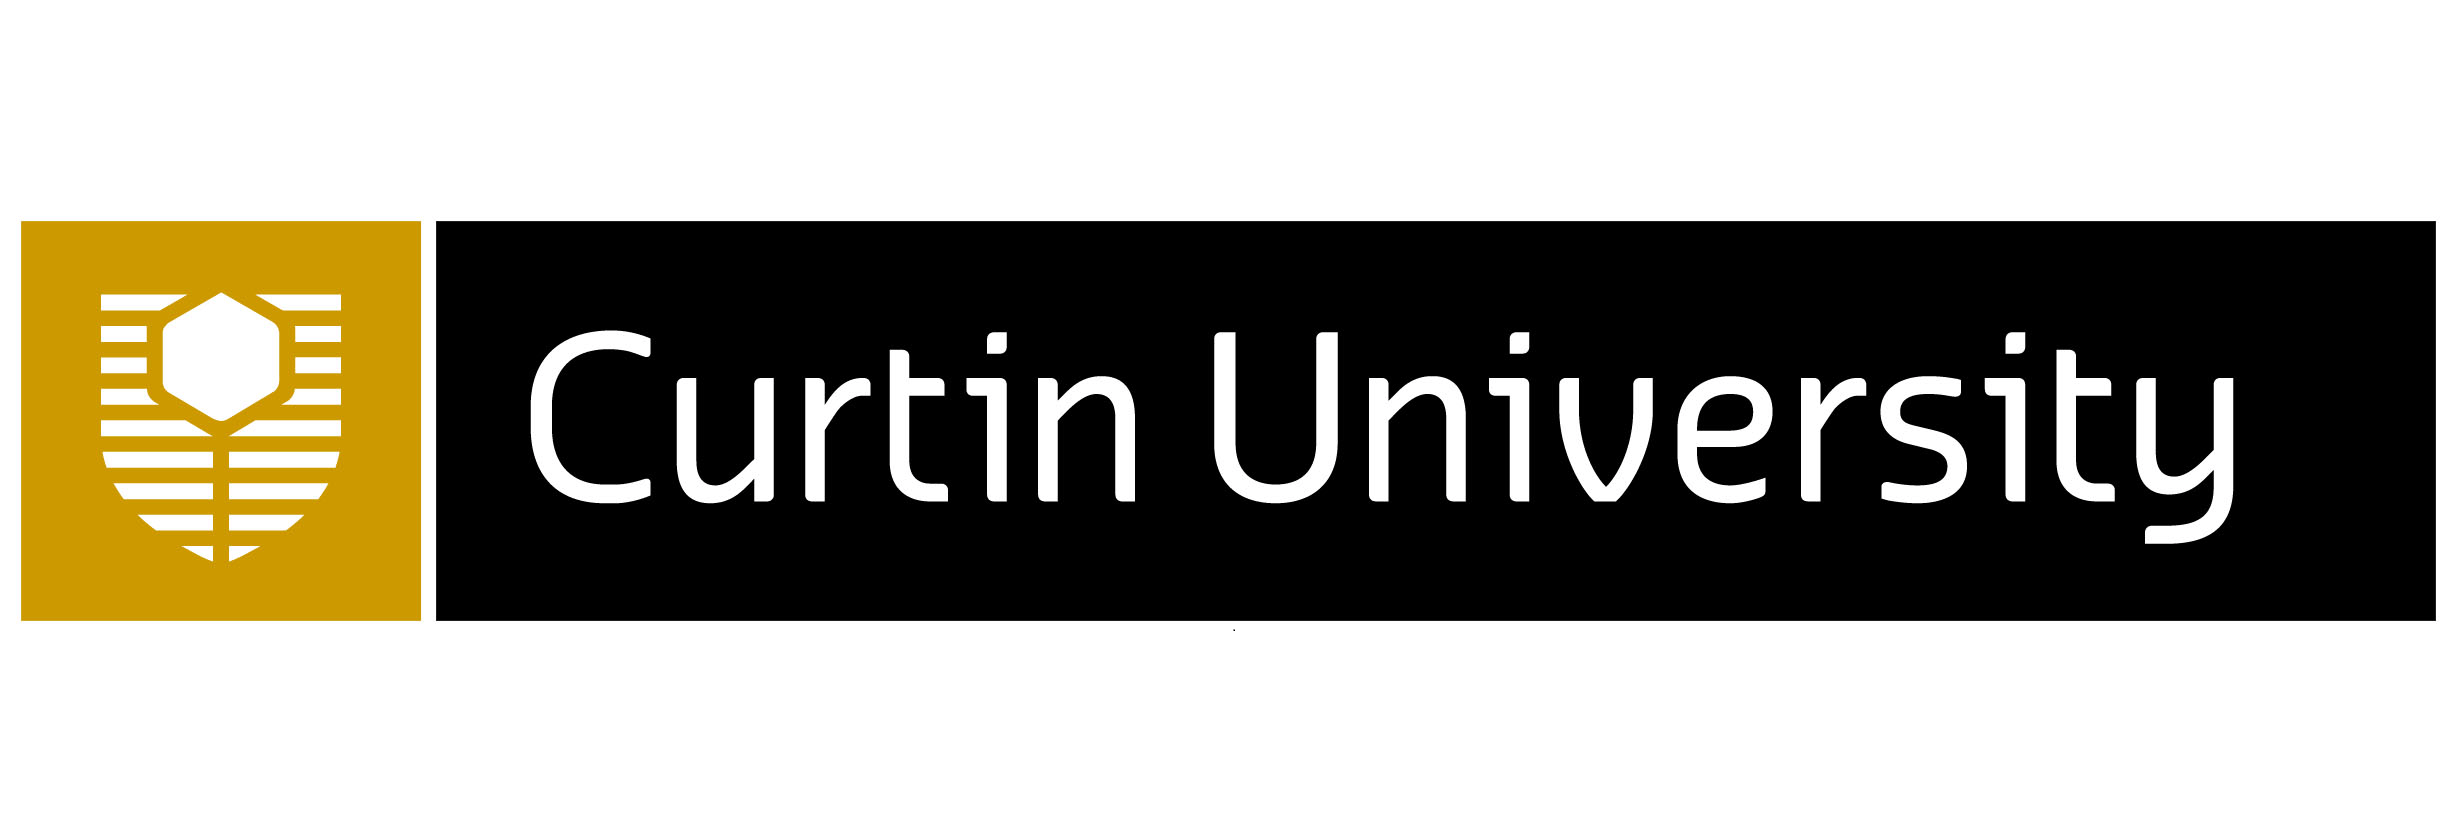 Bachelor of Arts (Urban and Regional Planning) | Bachelor's degree | Art & Design | On Campus | 3 to 5 years | Curtin University | Australia